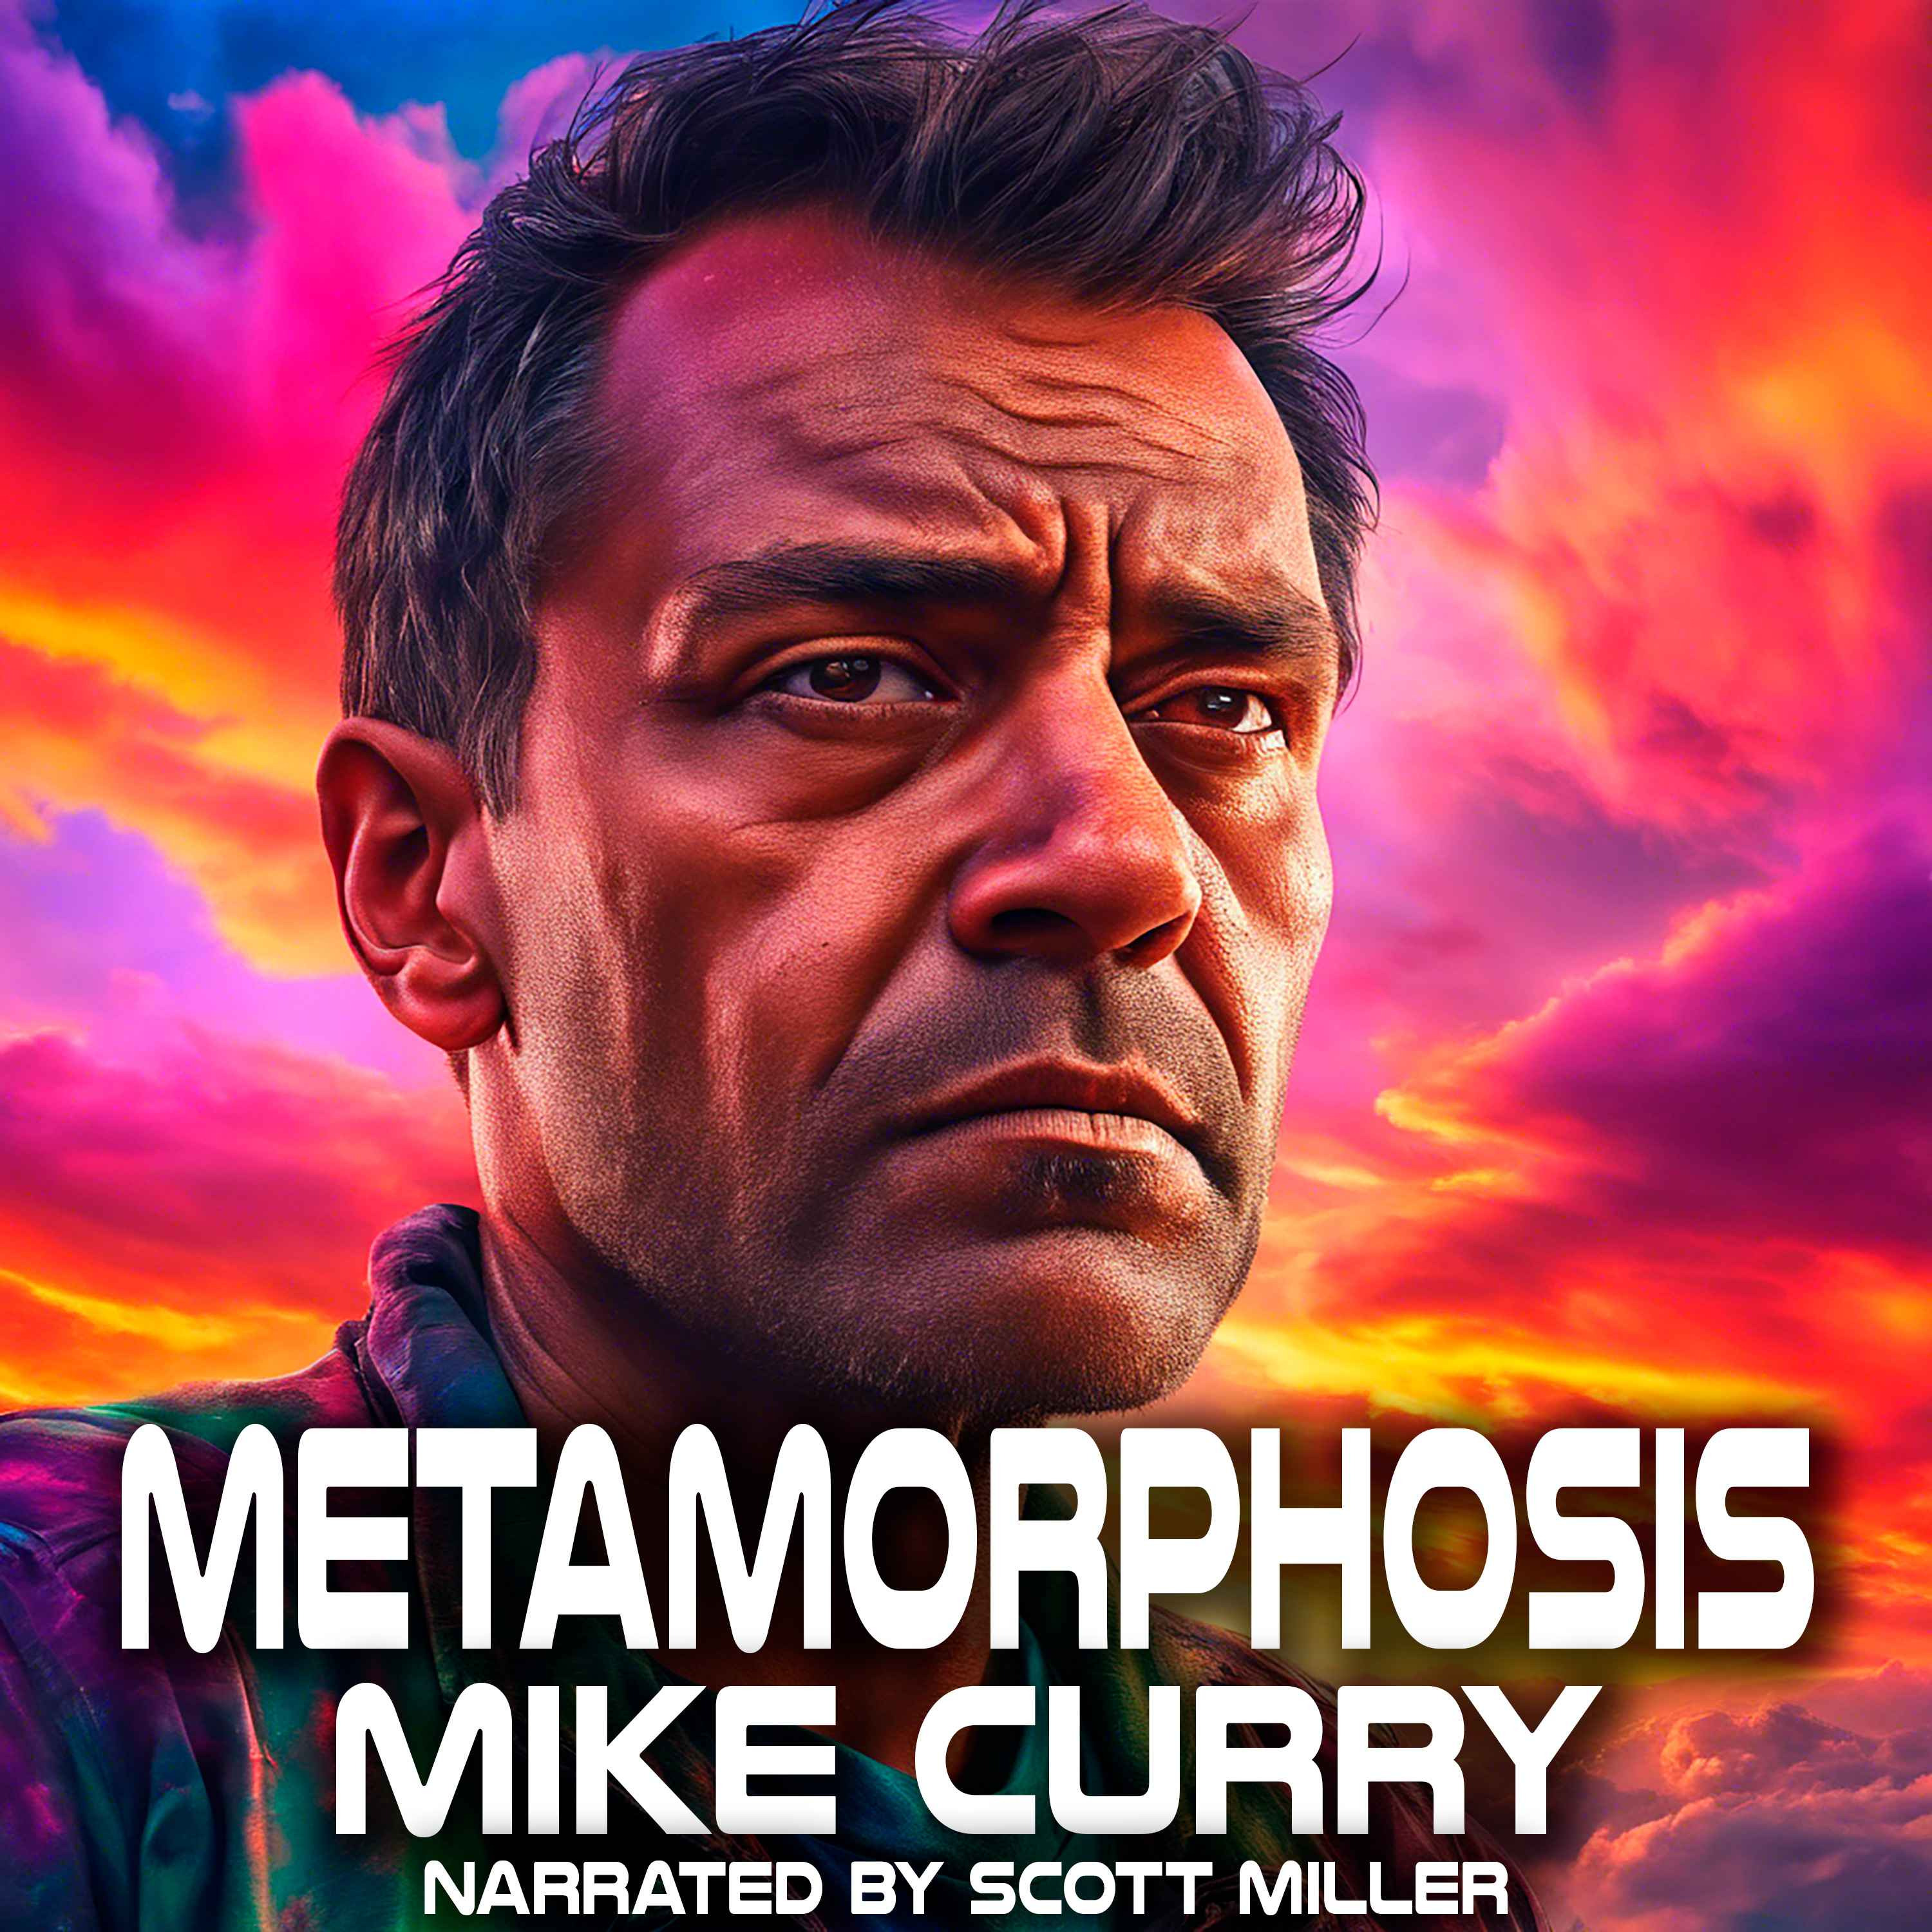 Metamorphosis by Mike Curry - Science Fiction Short Story From the 1950s